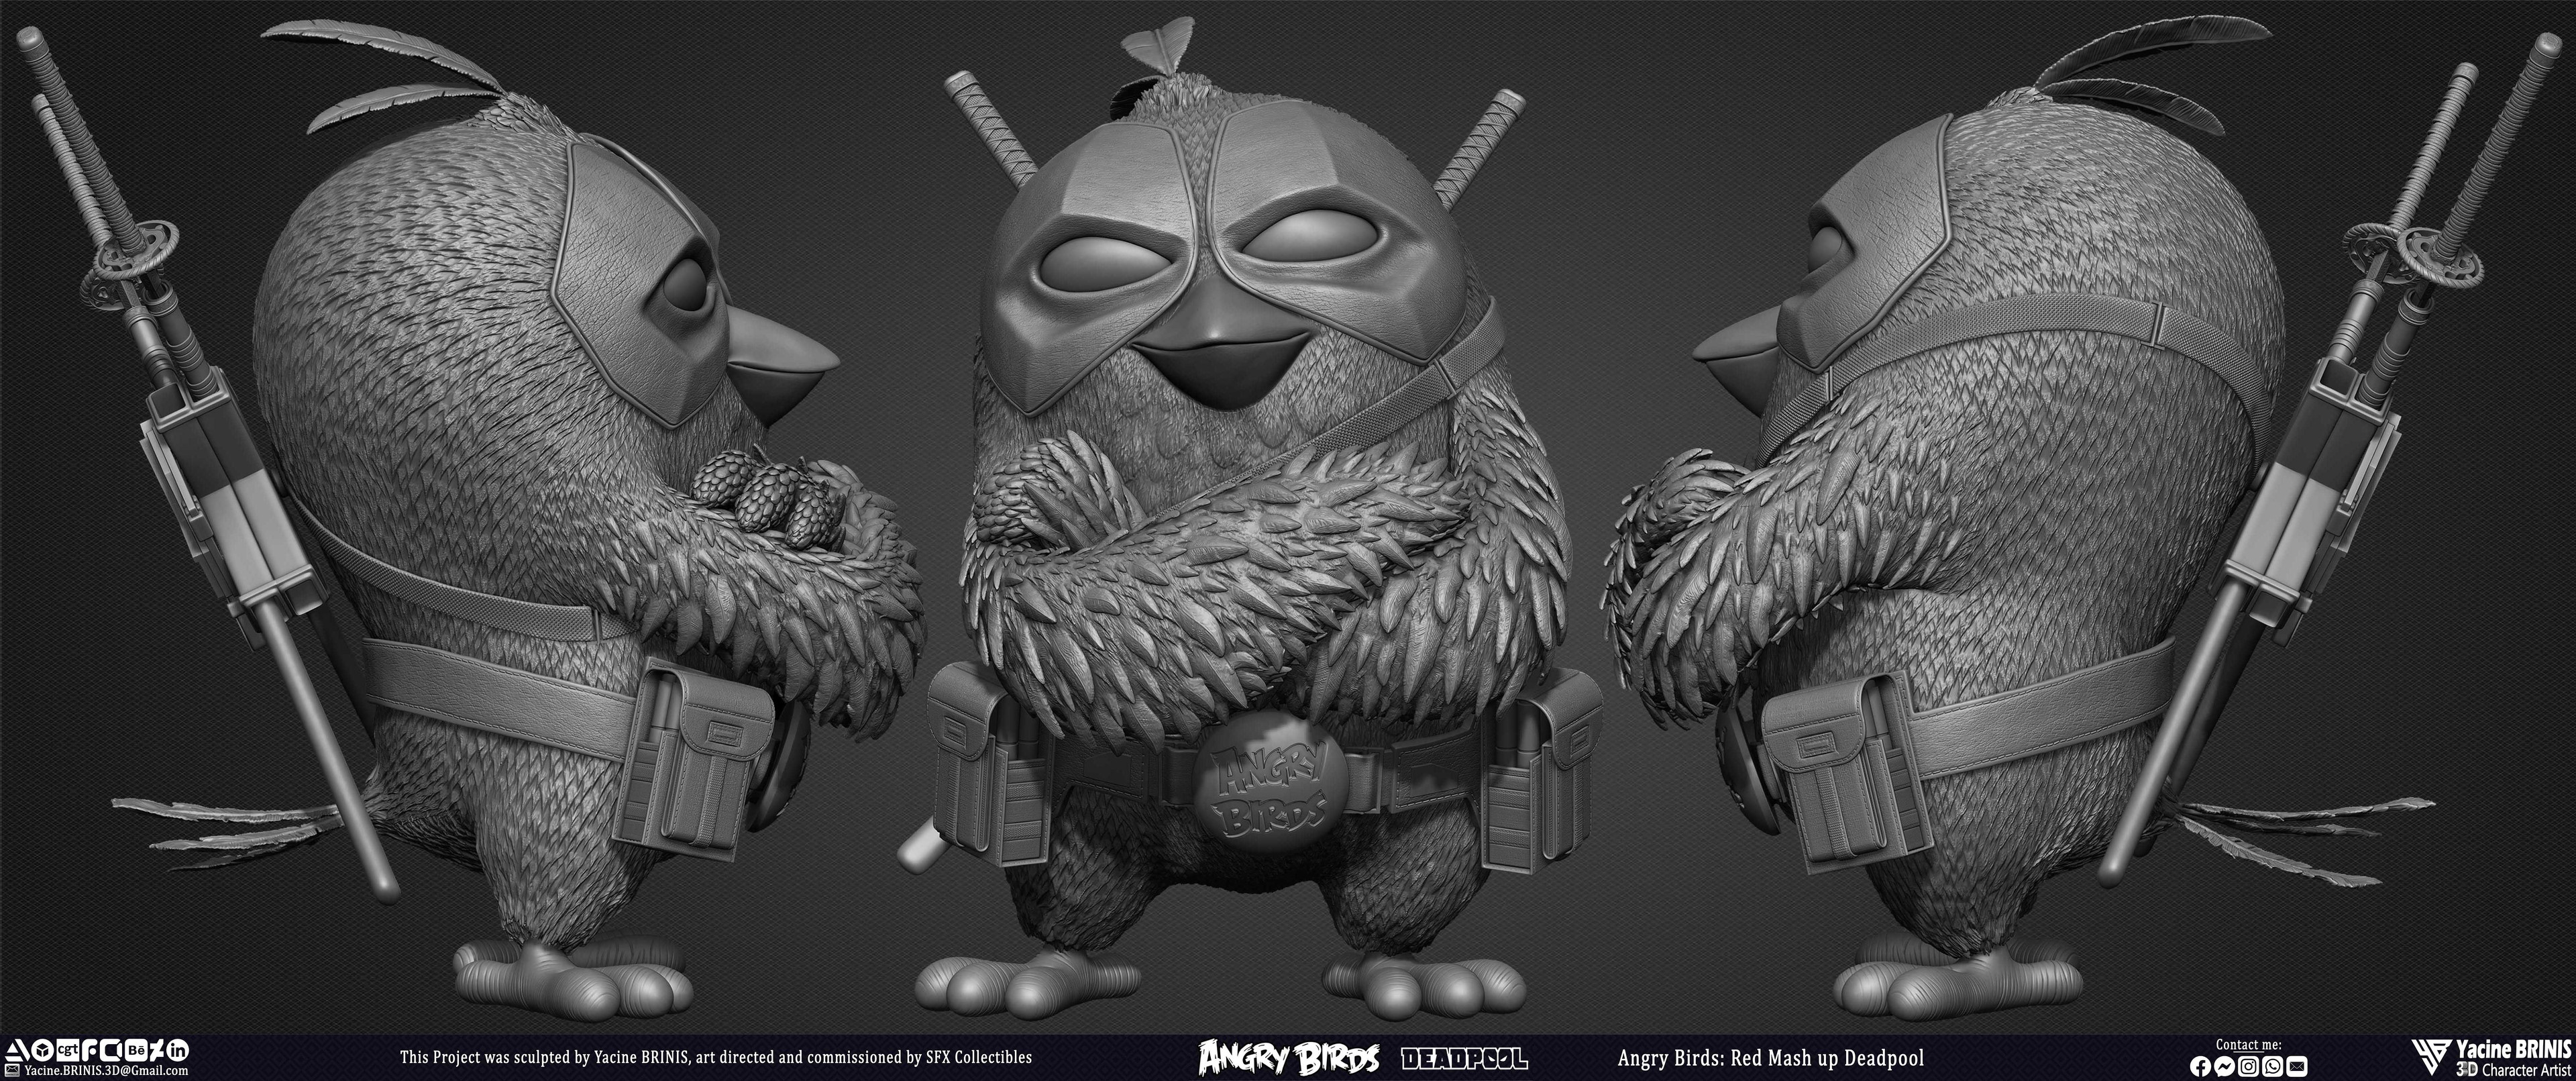 Red Mash Up Deadpool Angry Birds Movie 02 Rovio Entertainment sculpted By Yacine BRINIS 005